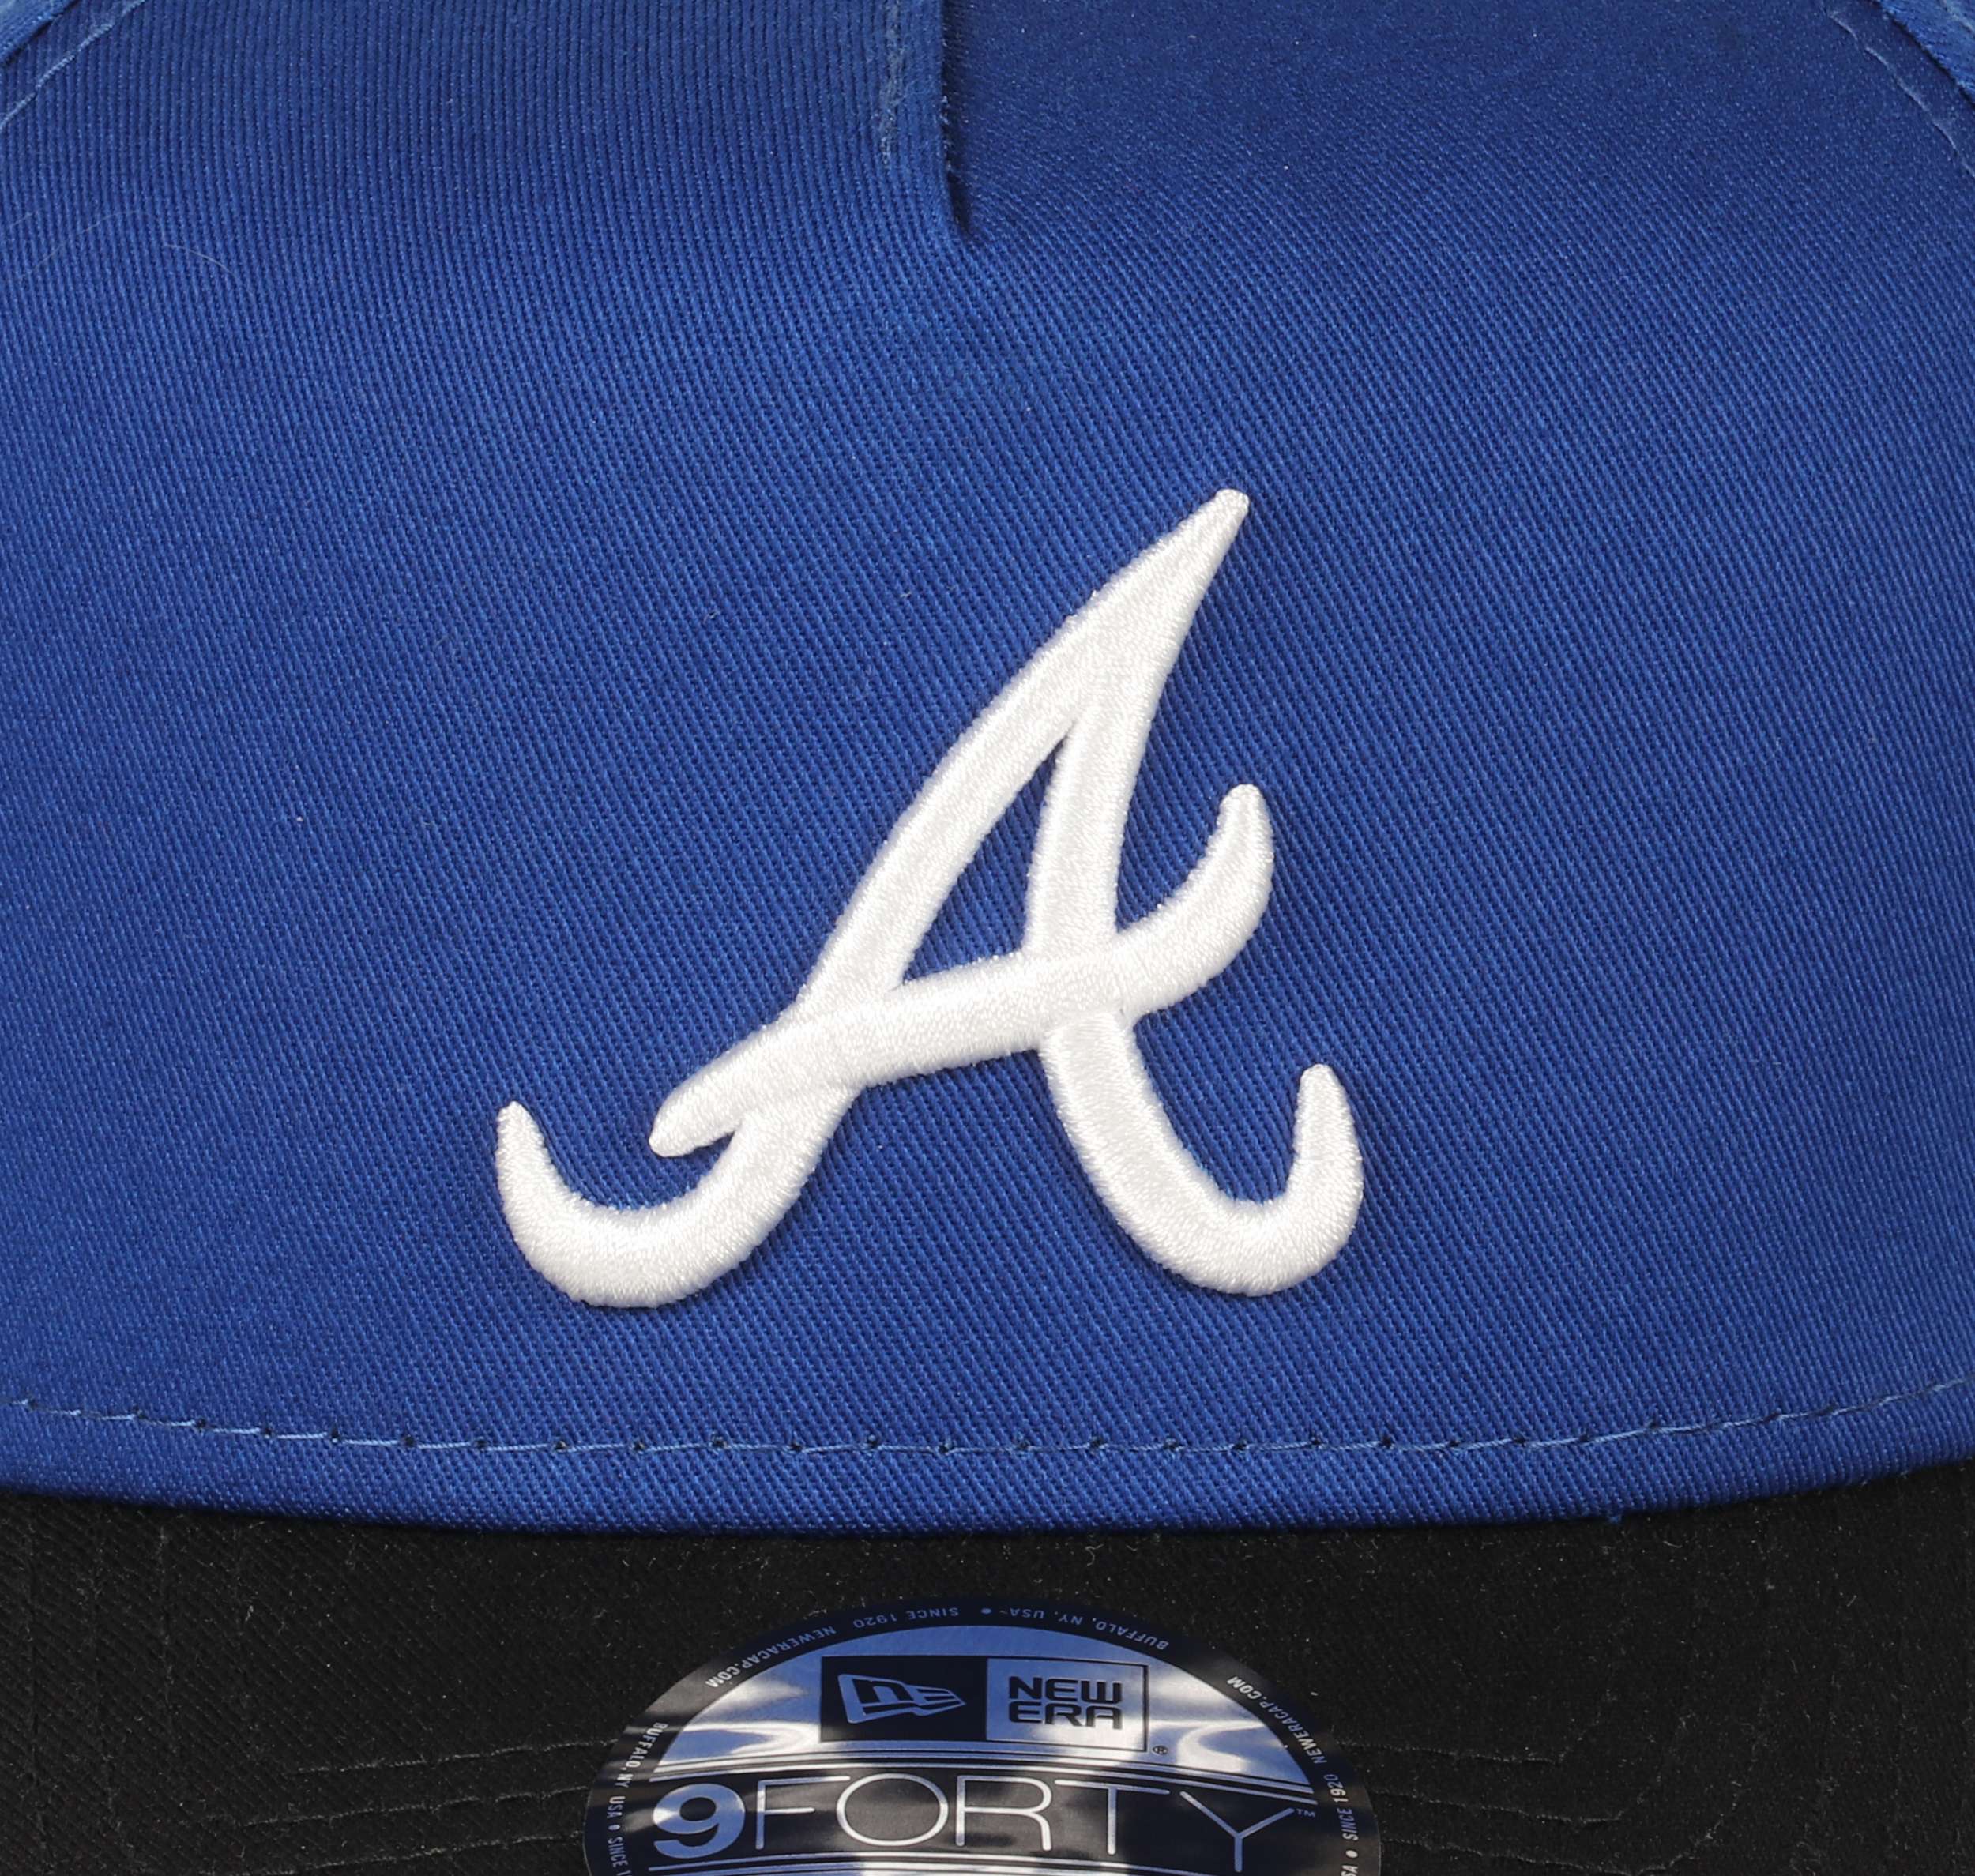 Atlanta Braves MLB World Series 1995 Sidepatch Cooperstown Royal Blue Sky 9Forty A-Frame Snapback Cap New Era